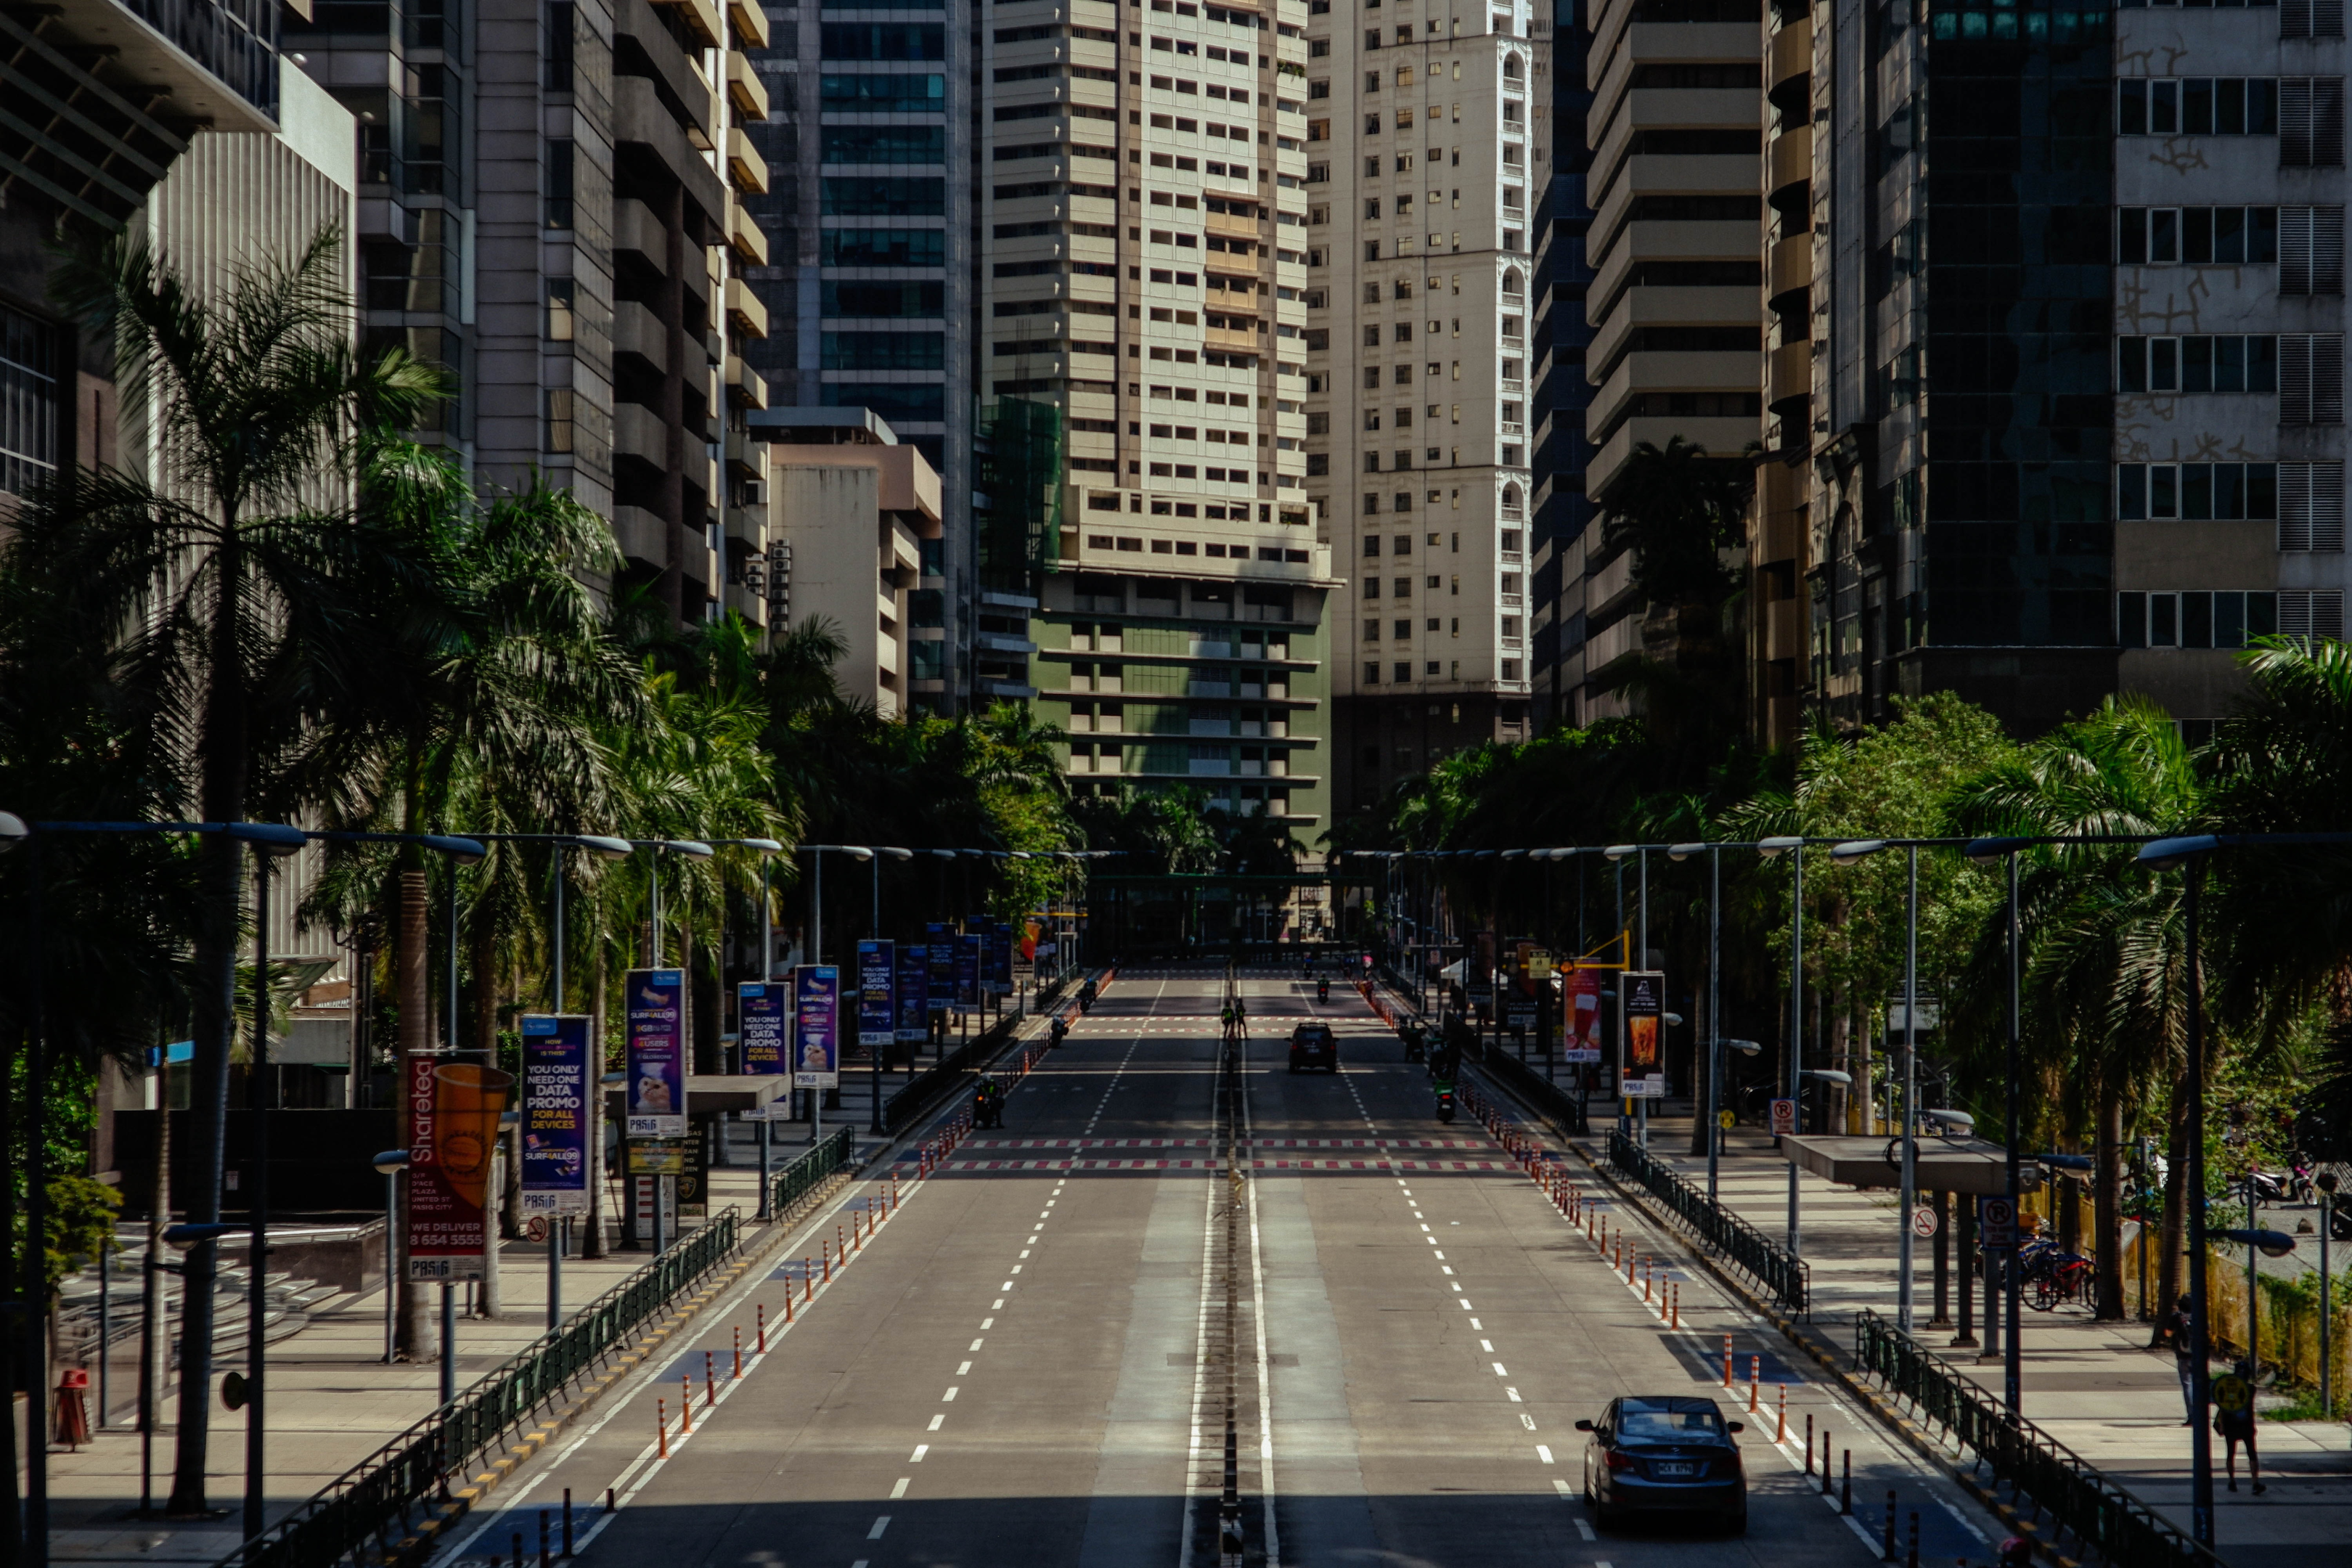 The Philippine economy is recovering as businesses slowly return to regular operations | Photo by Jason Aleligay from Pexels